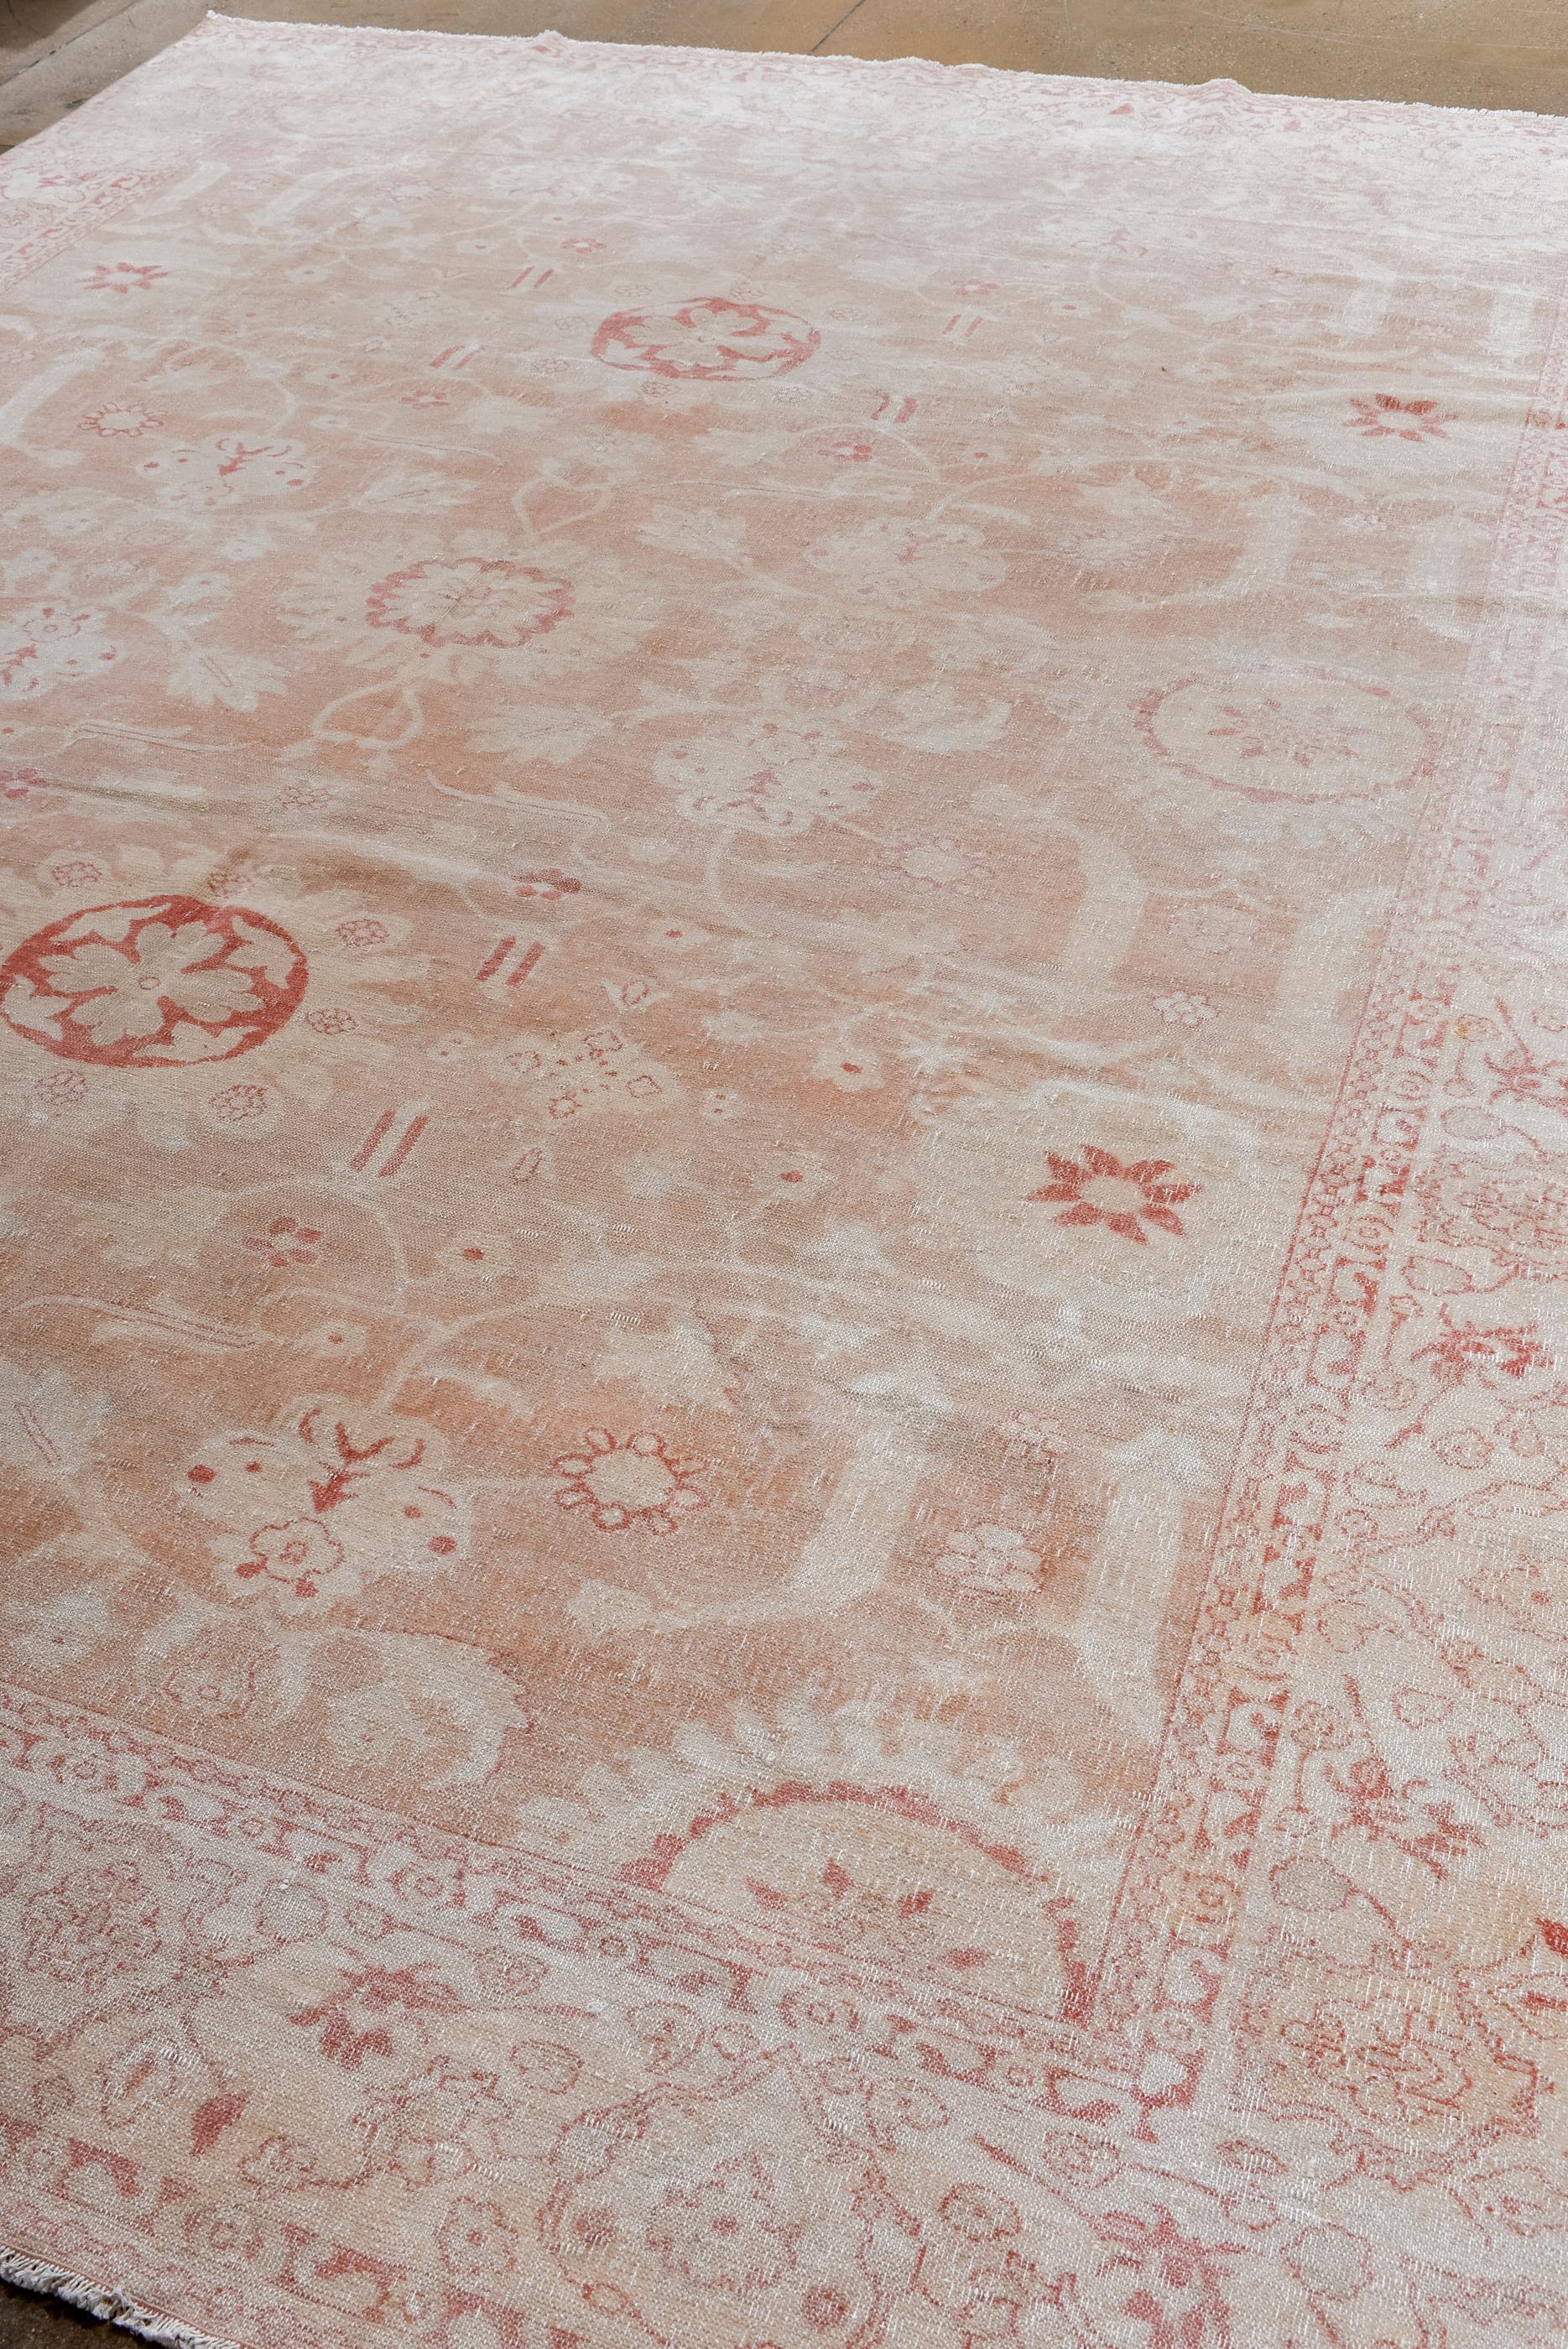 Hand-Knotted New Turkish Oushak with Rosette Patterns